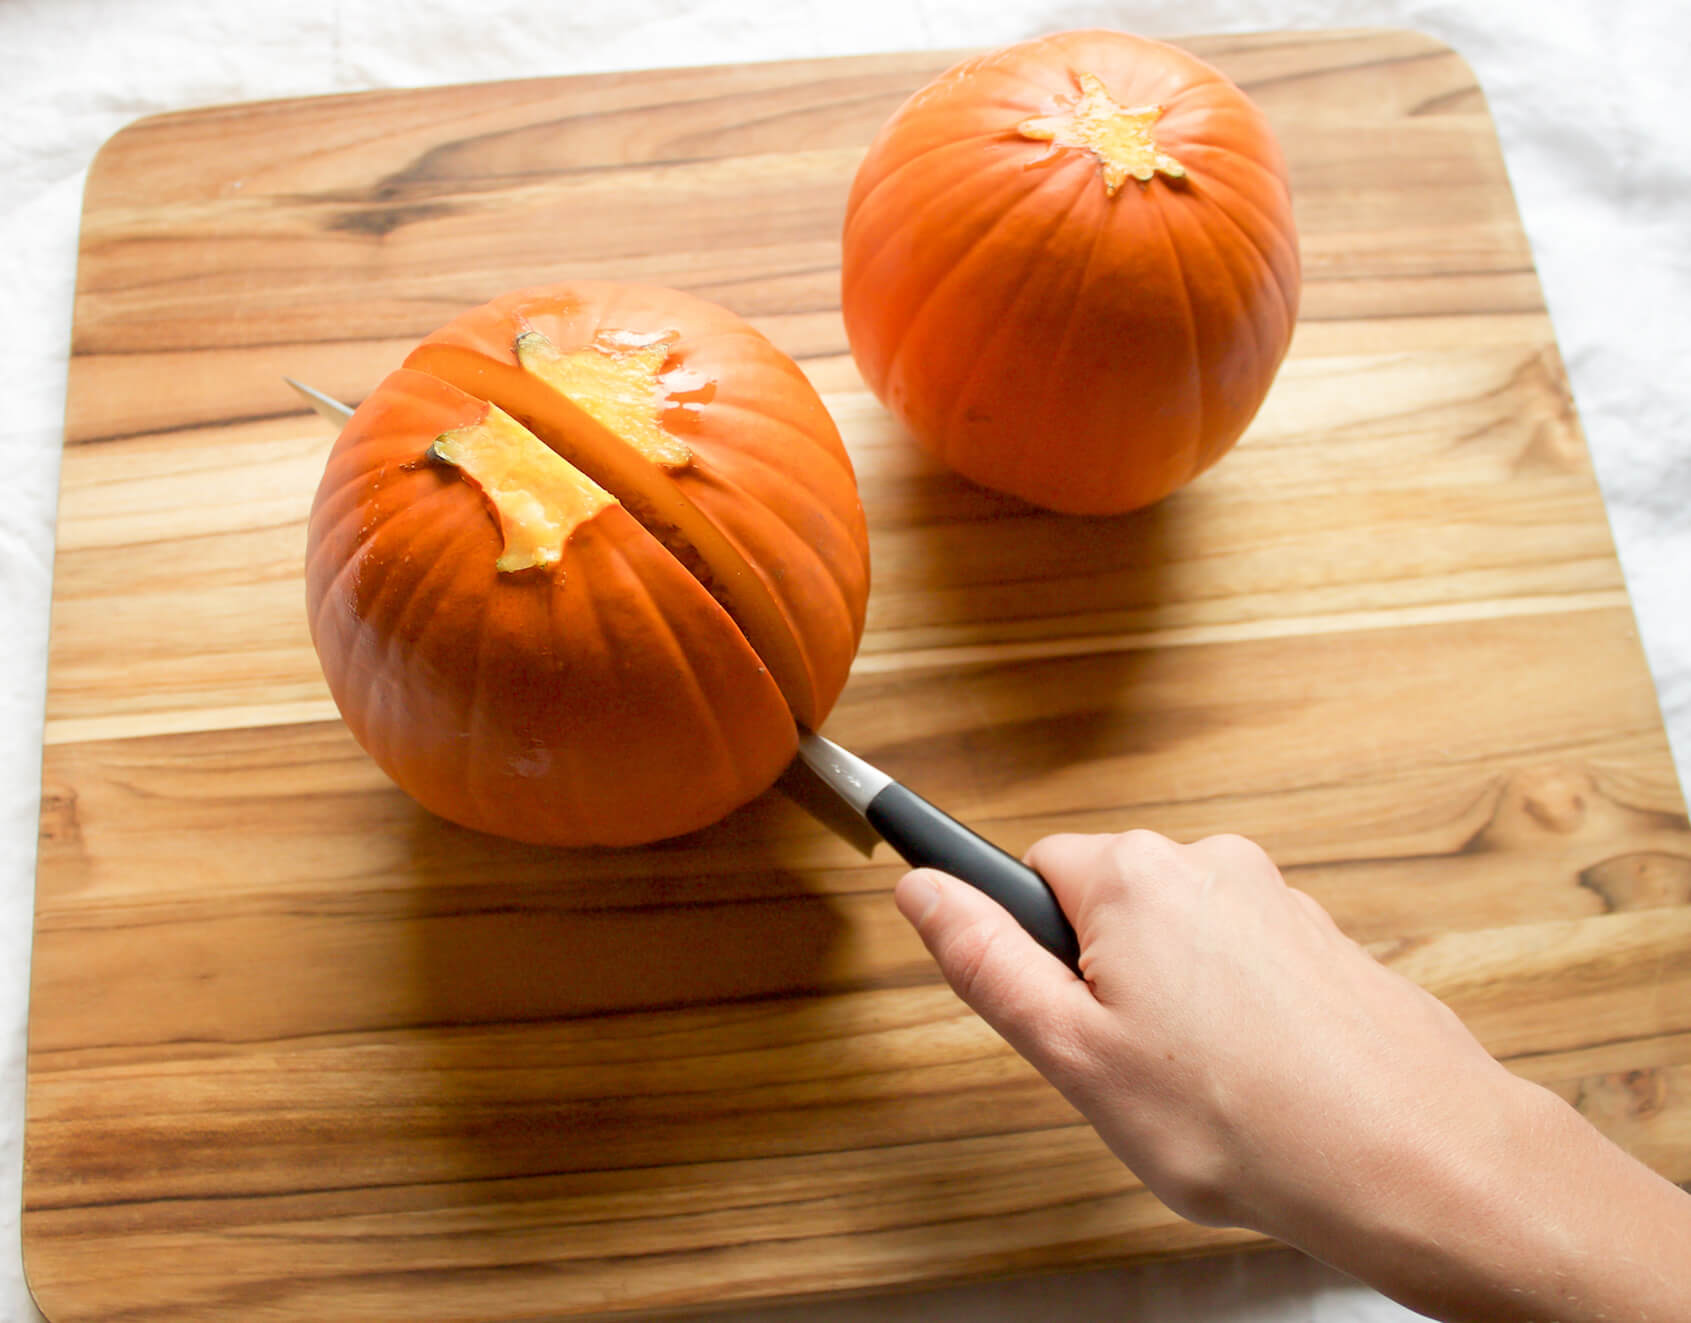 small baking pumpkins on cutting board with hand using a knife to cut